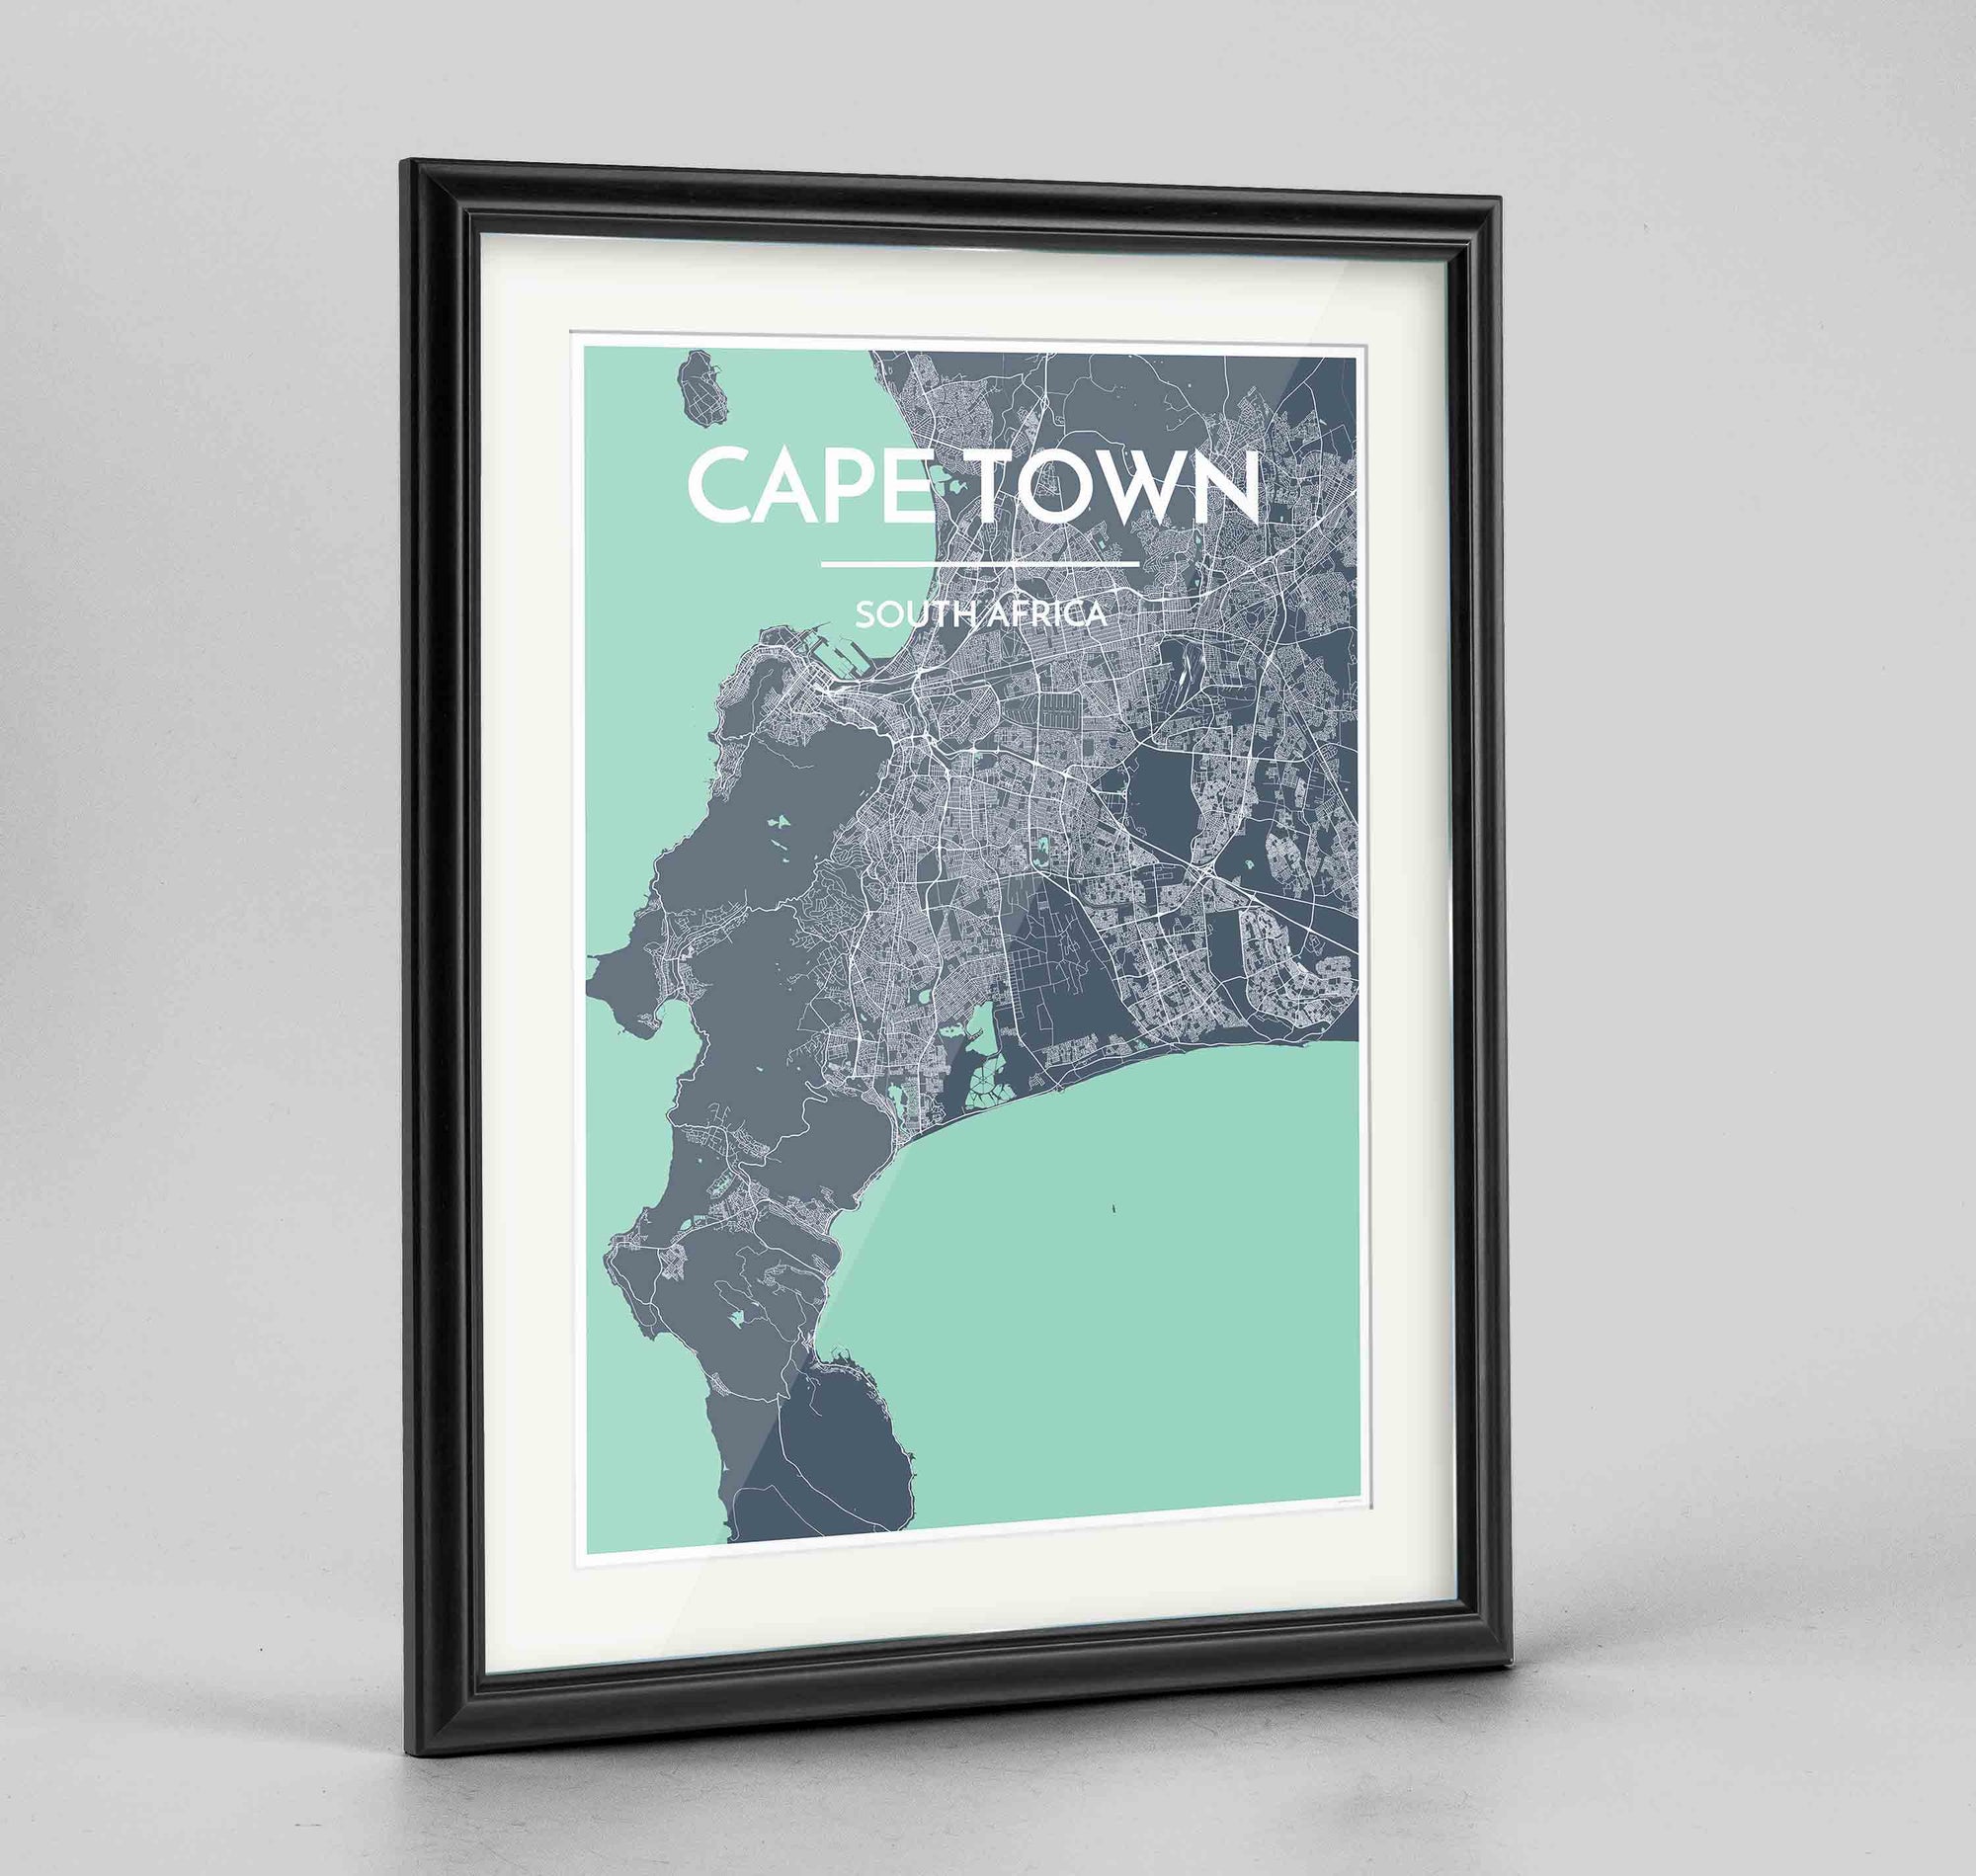 Framed Cape Town Map Art Print 24x36" Traditional Black frame Point Two Design Group